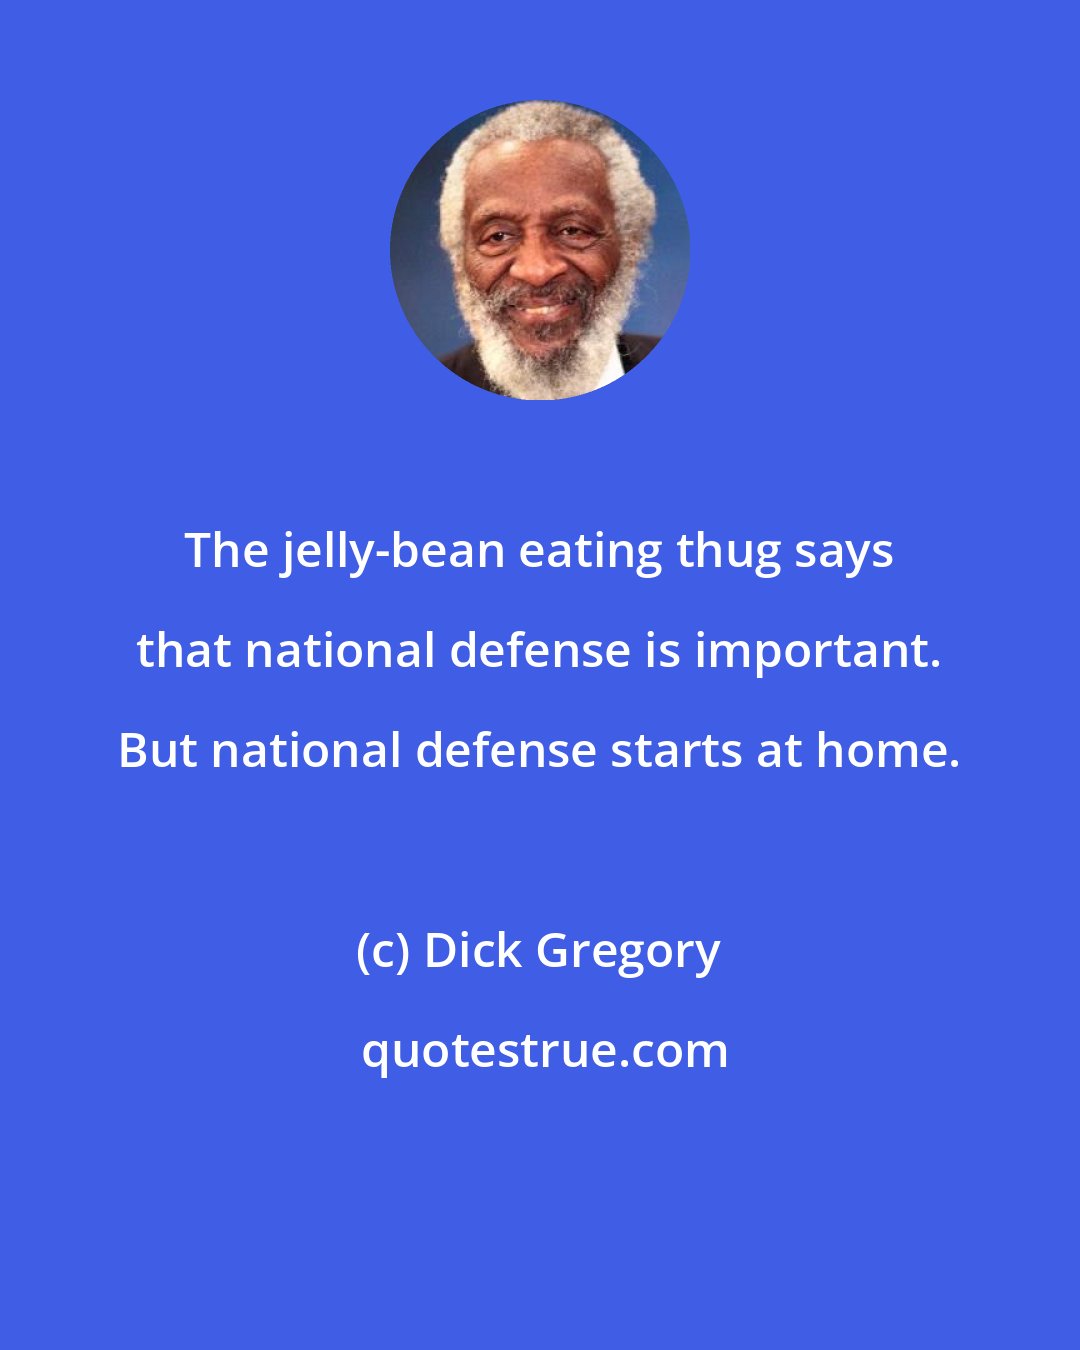 Dick Gregory: The jelly-bean eating thug says that national defense is important. But national defense starts at home.